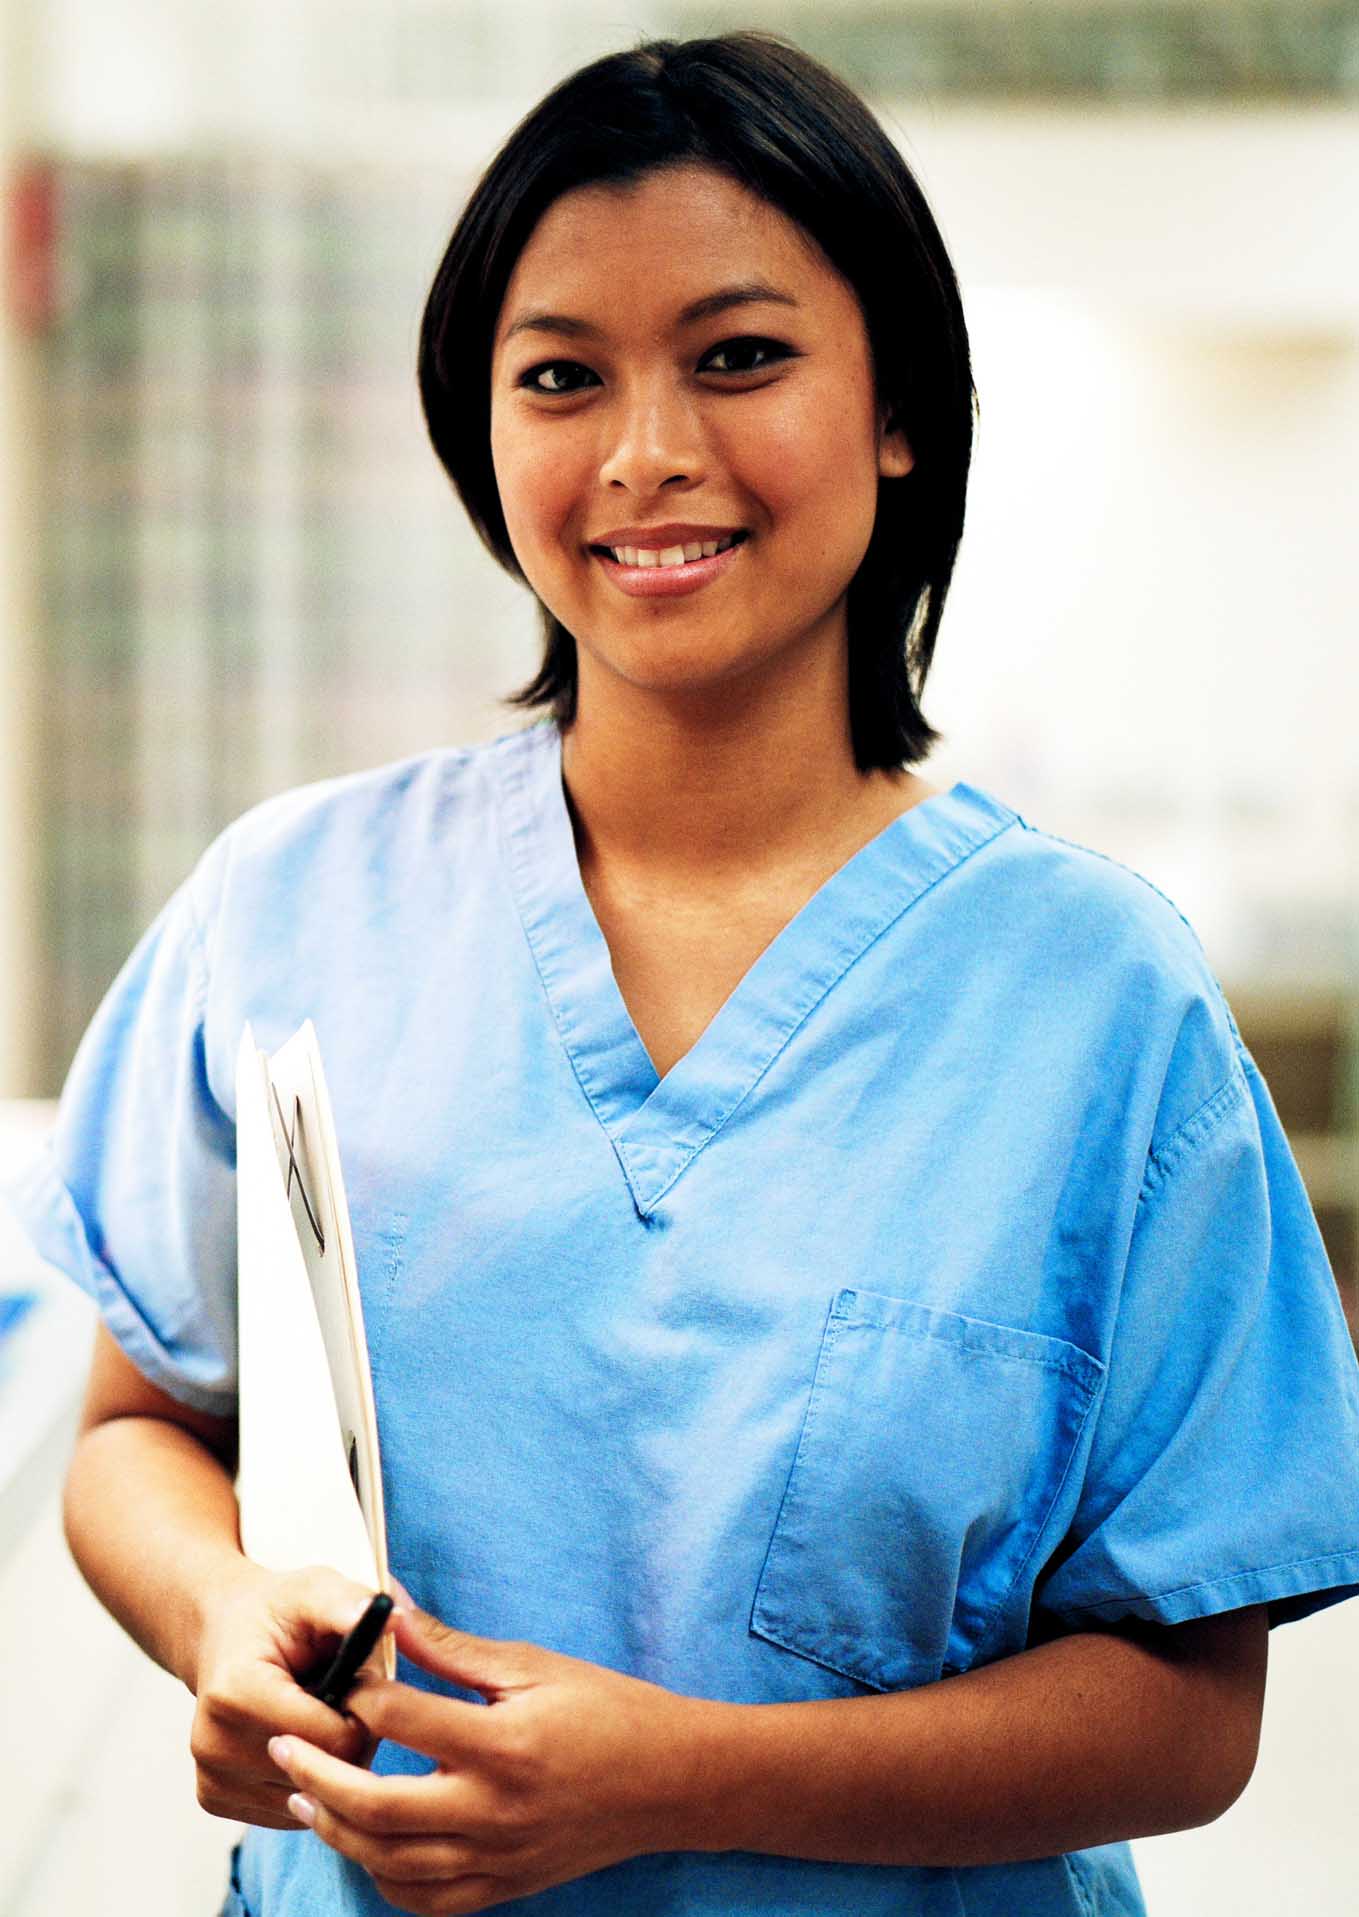 Photo of a health care worker smiling - BJC HealthCare employee onboarding